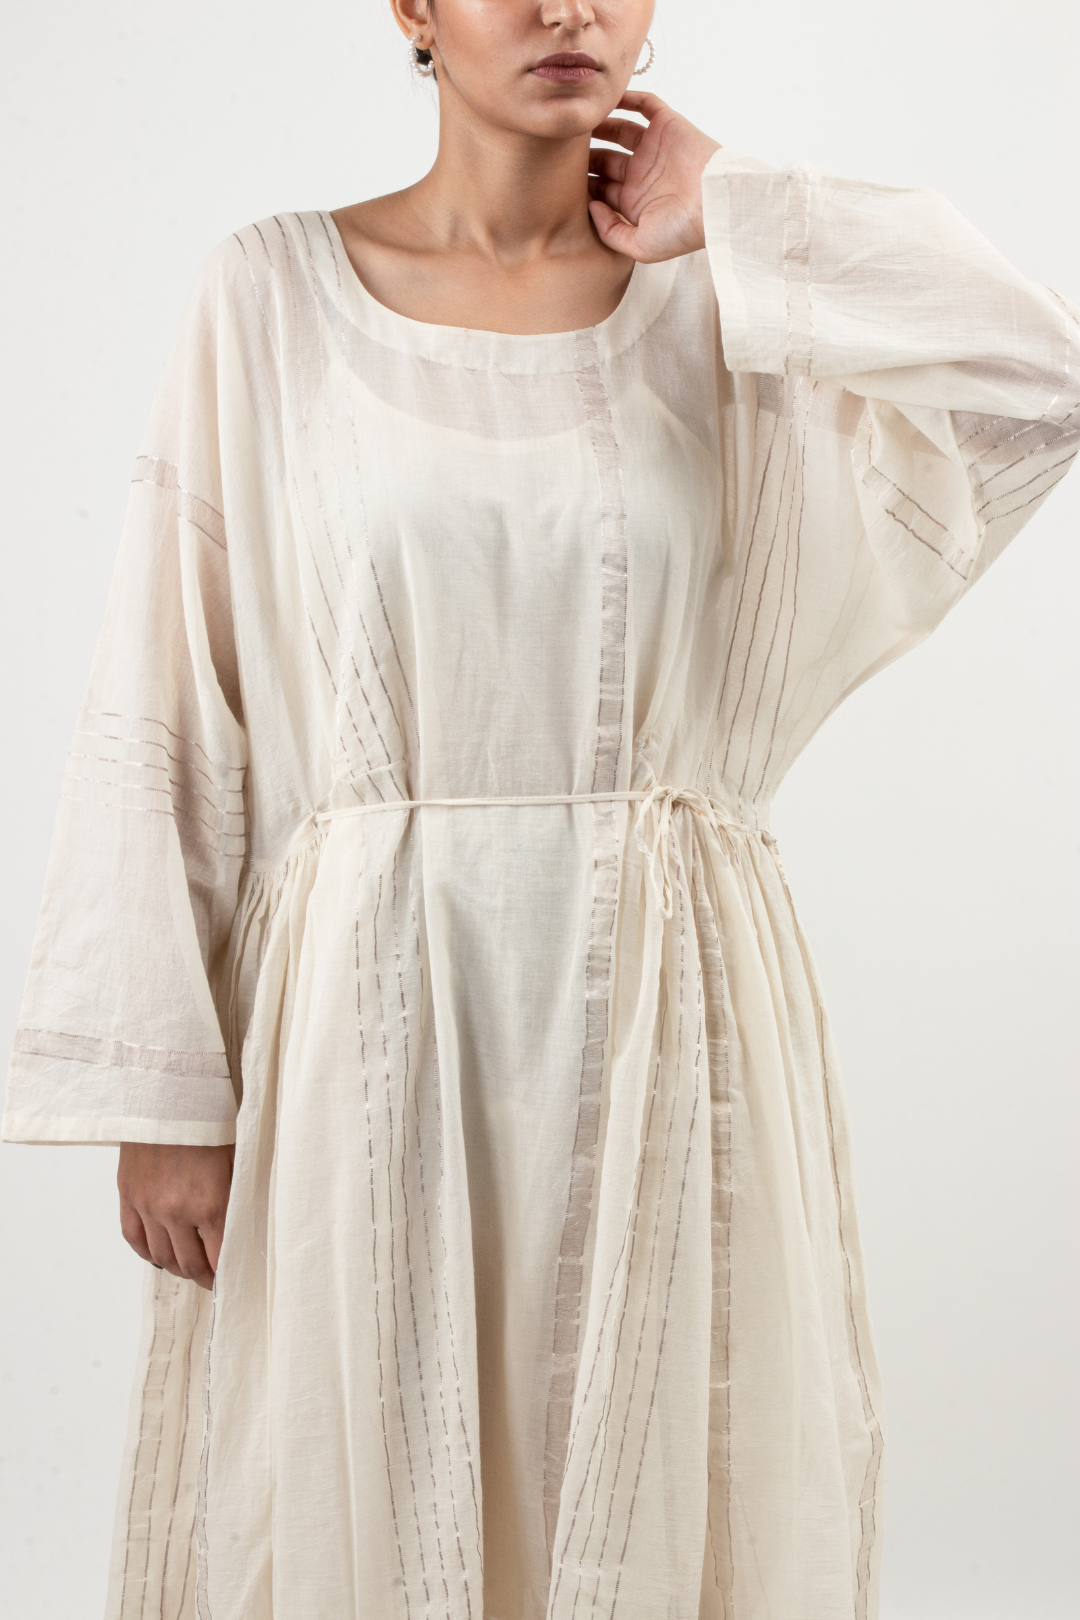 YUGA | OffWhite Dress with Silver detail | Paliam